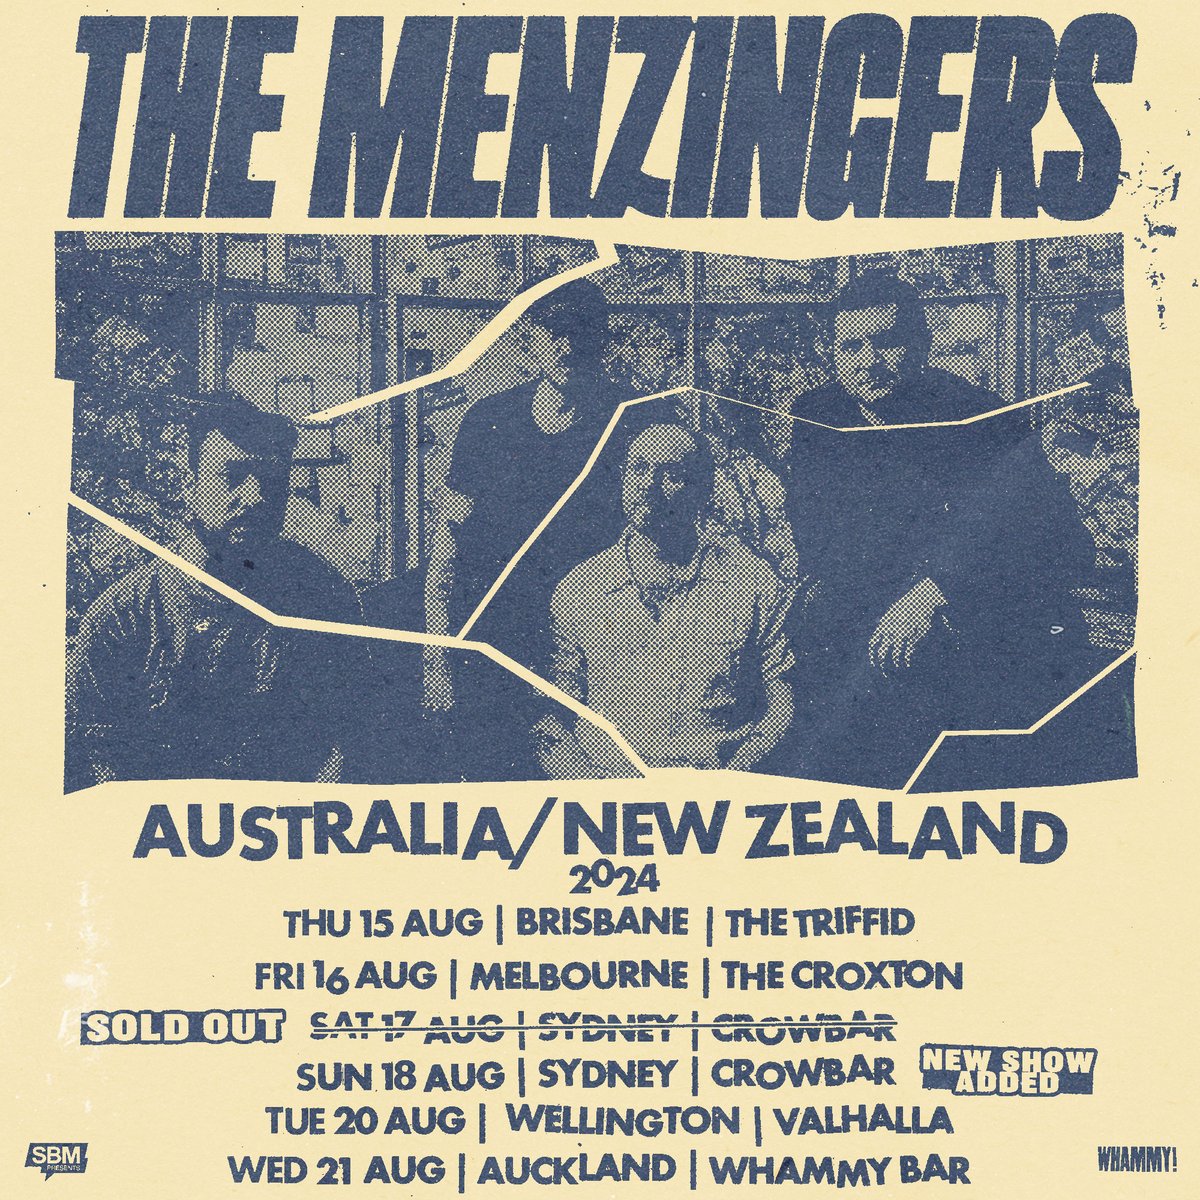 Sydney sold out so we've added a second night. Tickets on sale now at TheMenzingers.com